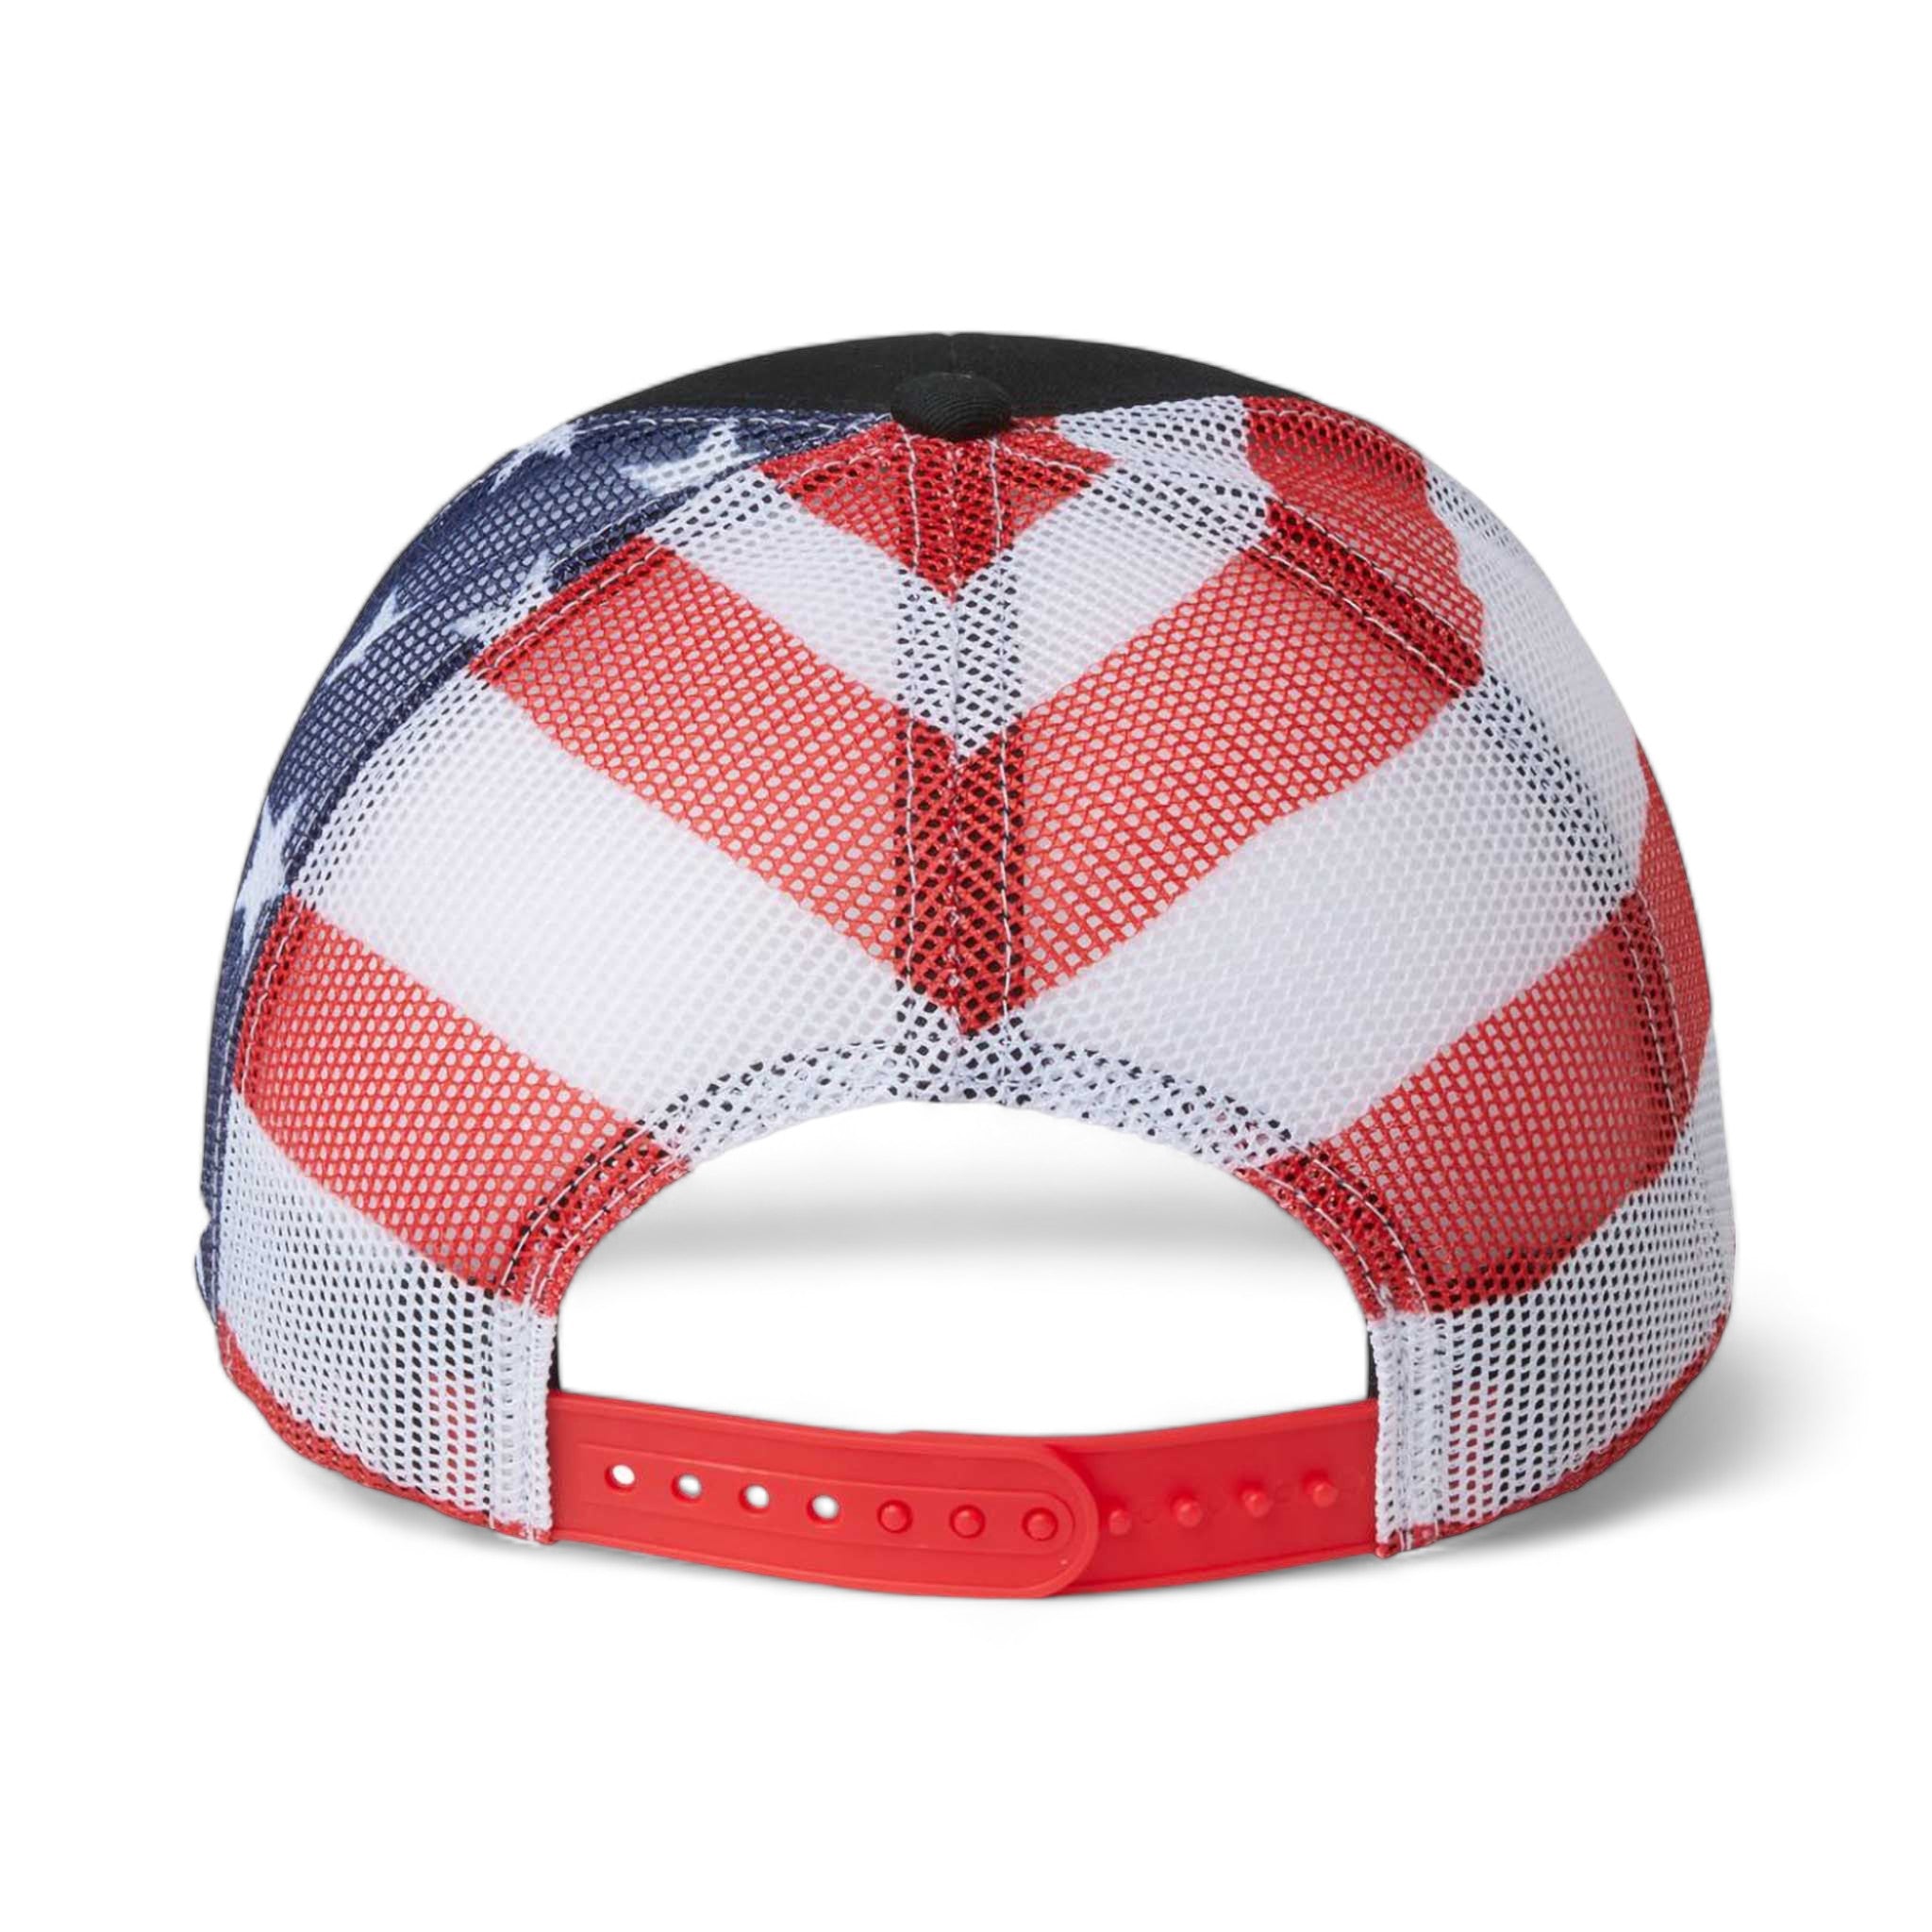 Back view of Kati S700M custom hat in black and usa flag